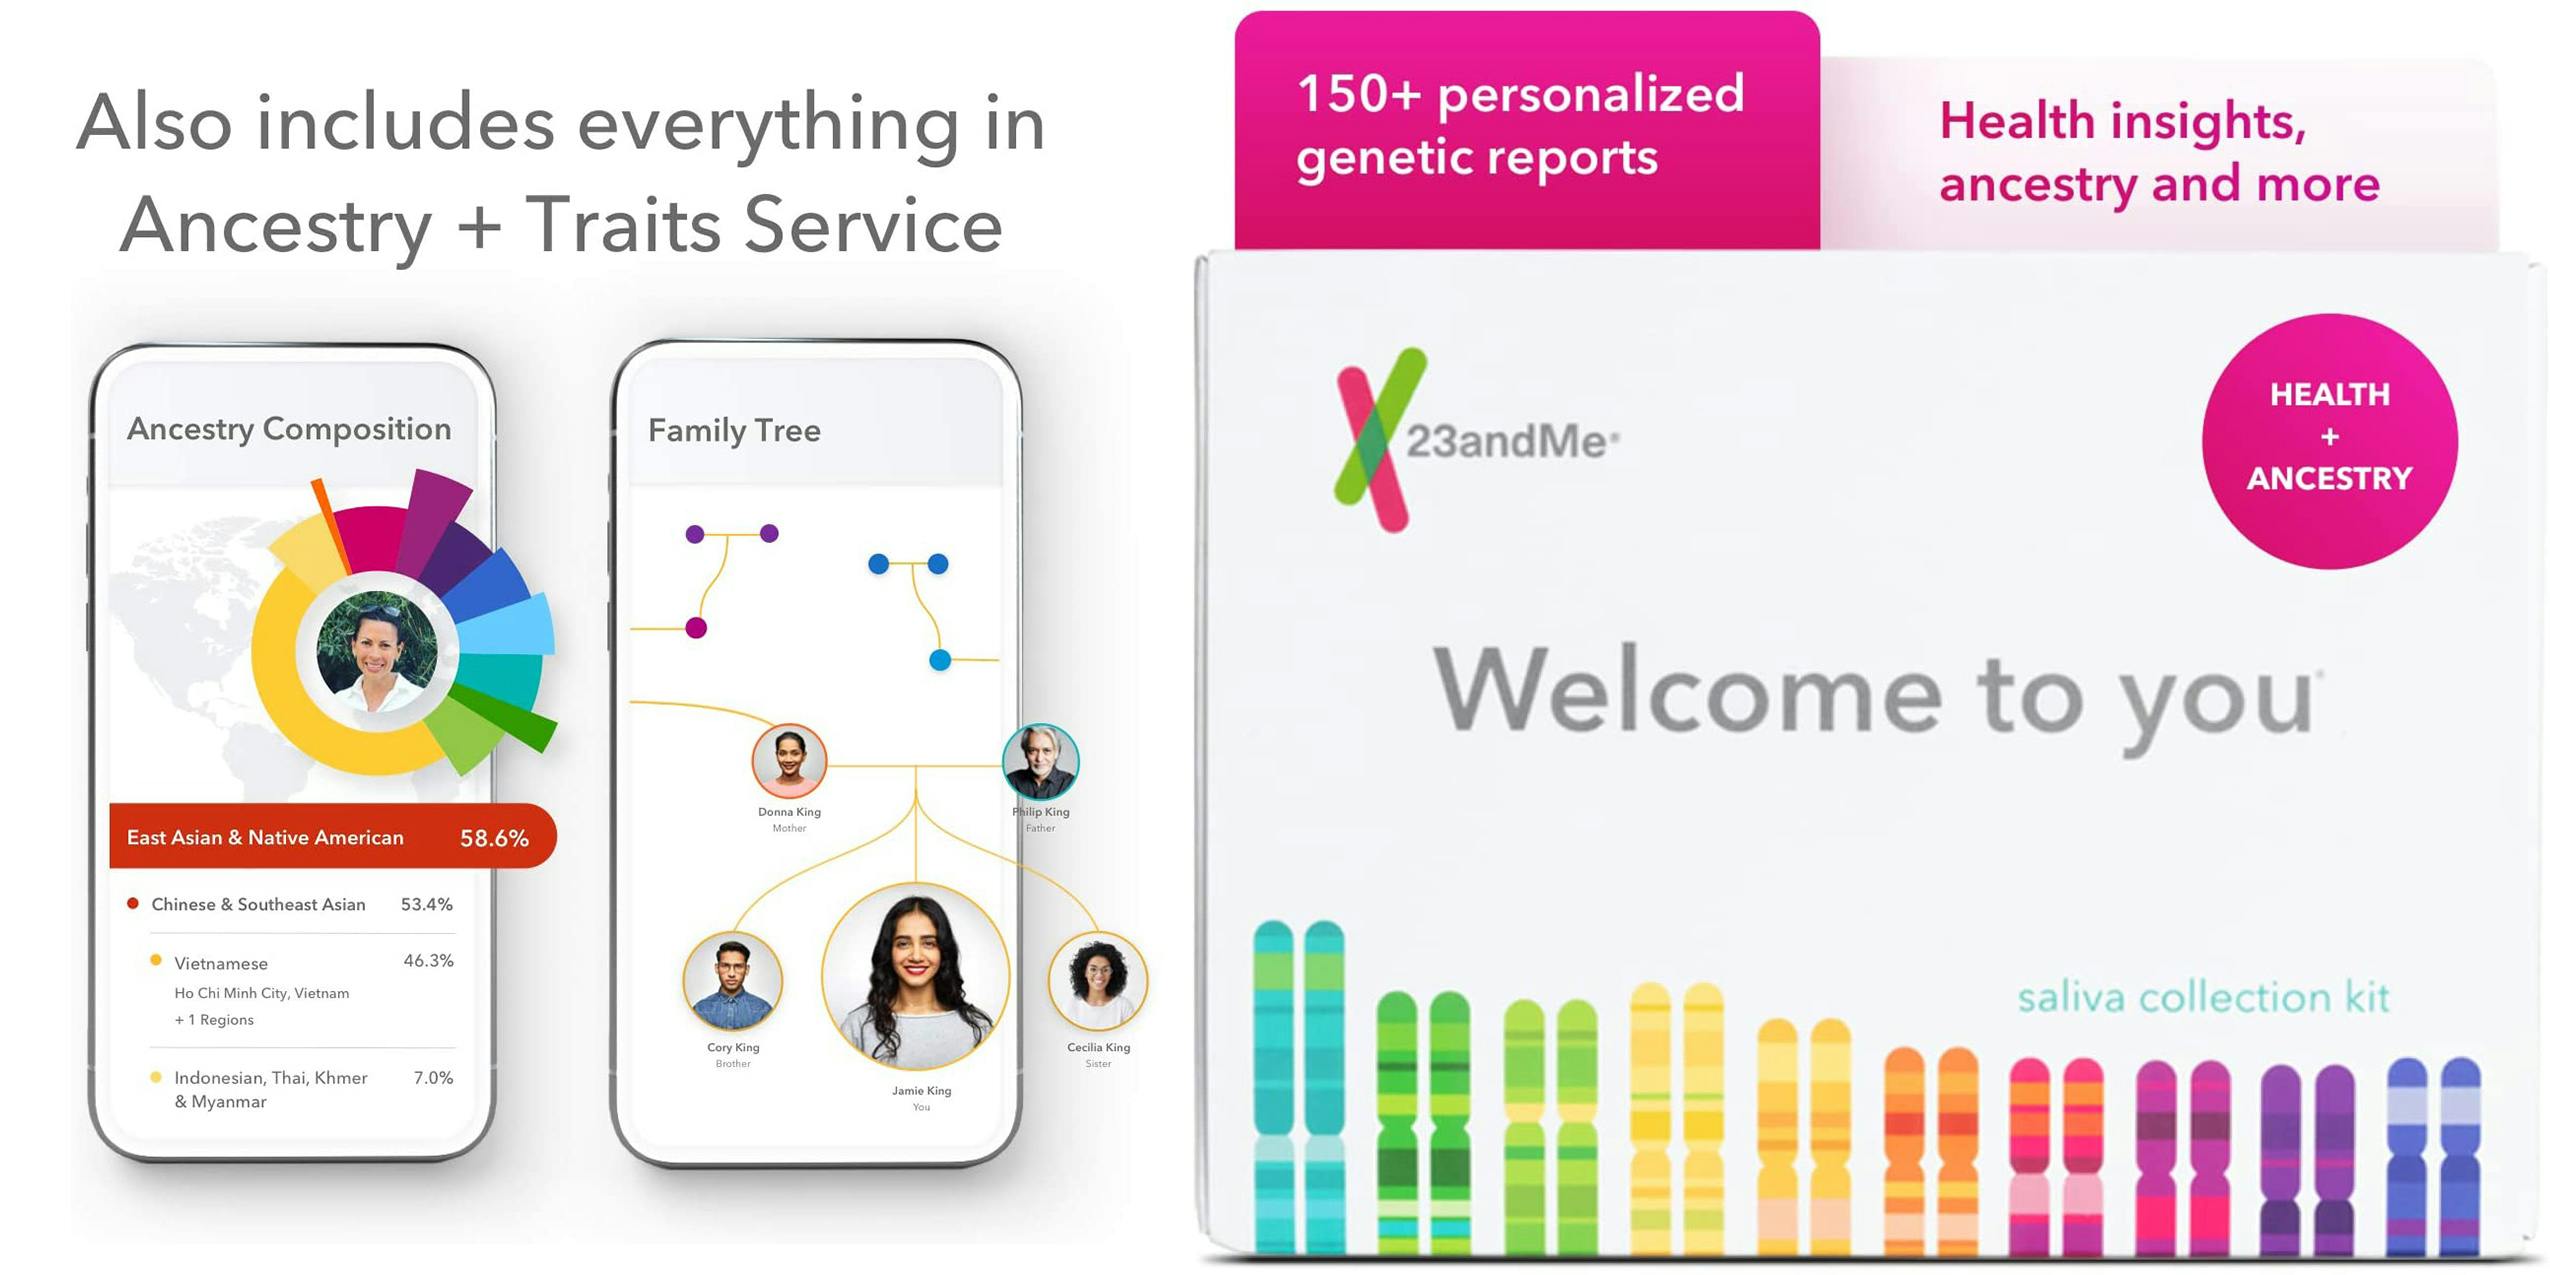 23+Me Ancestry Test product image, the perfect gift idea for curious moms